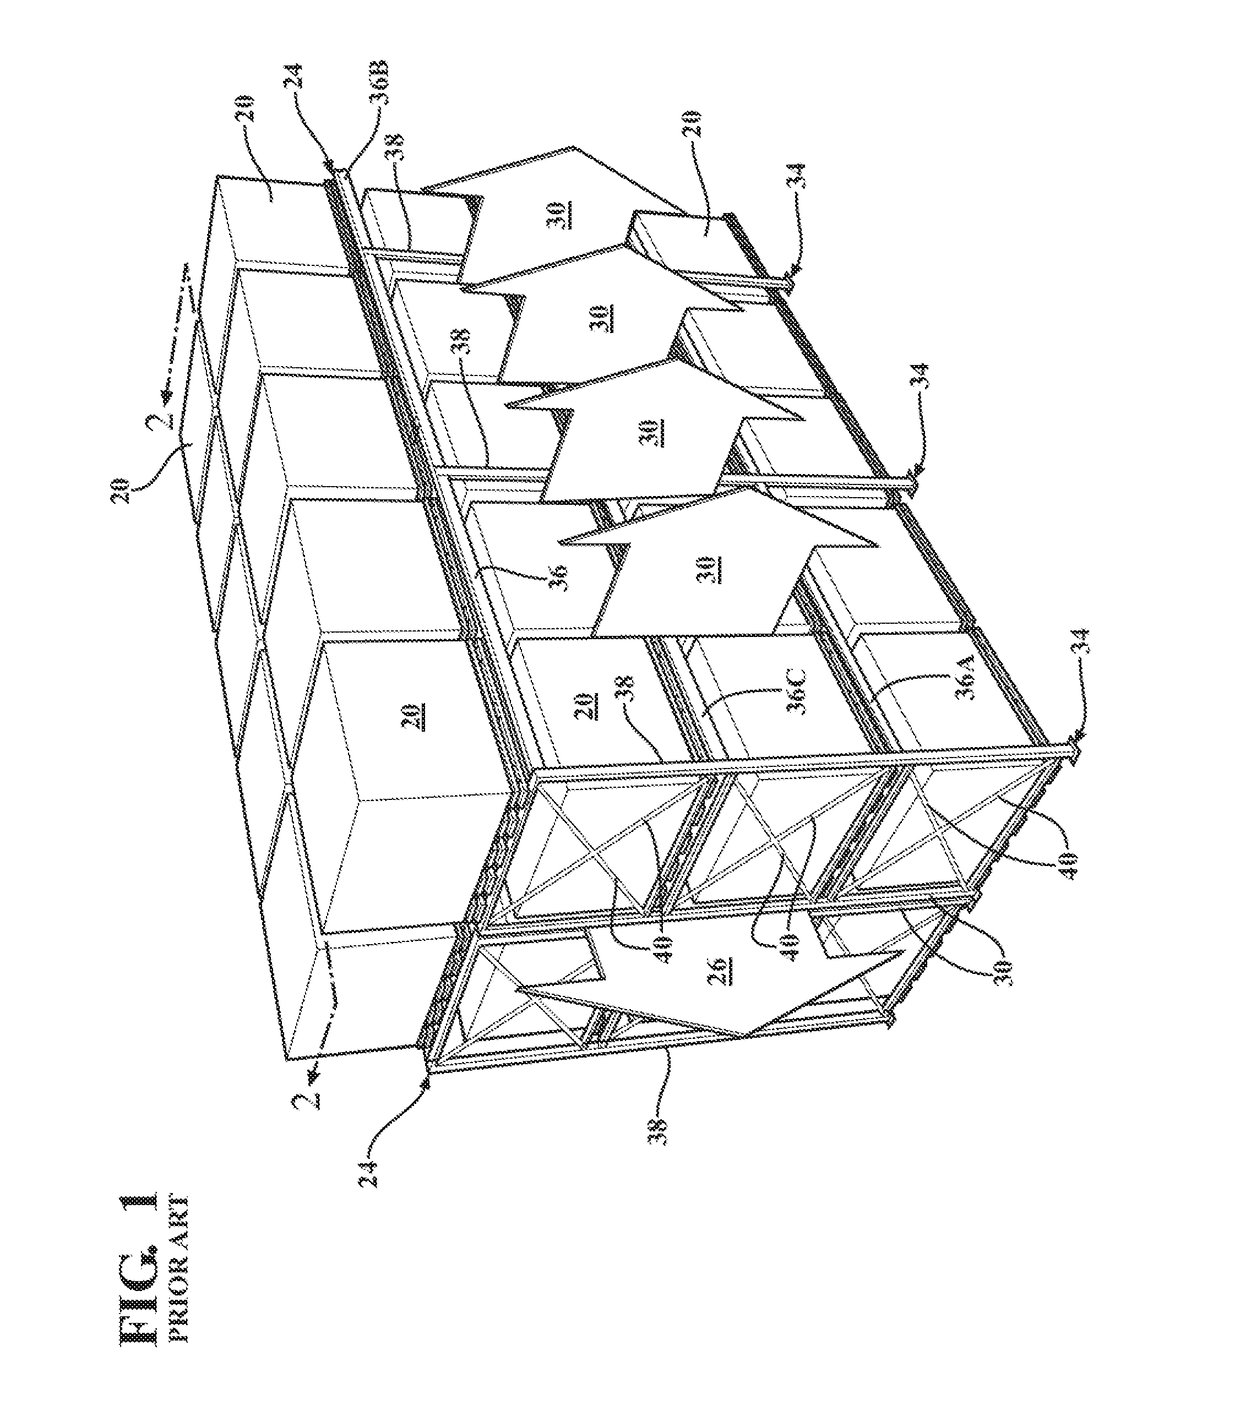 Water collecting pallet rack and method of fire protection